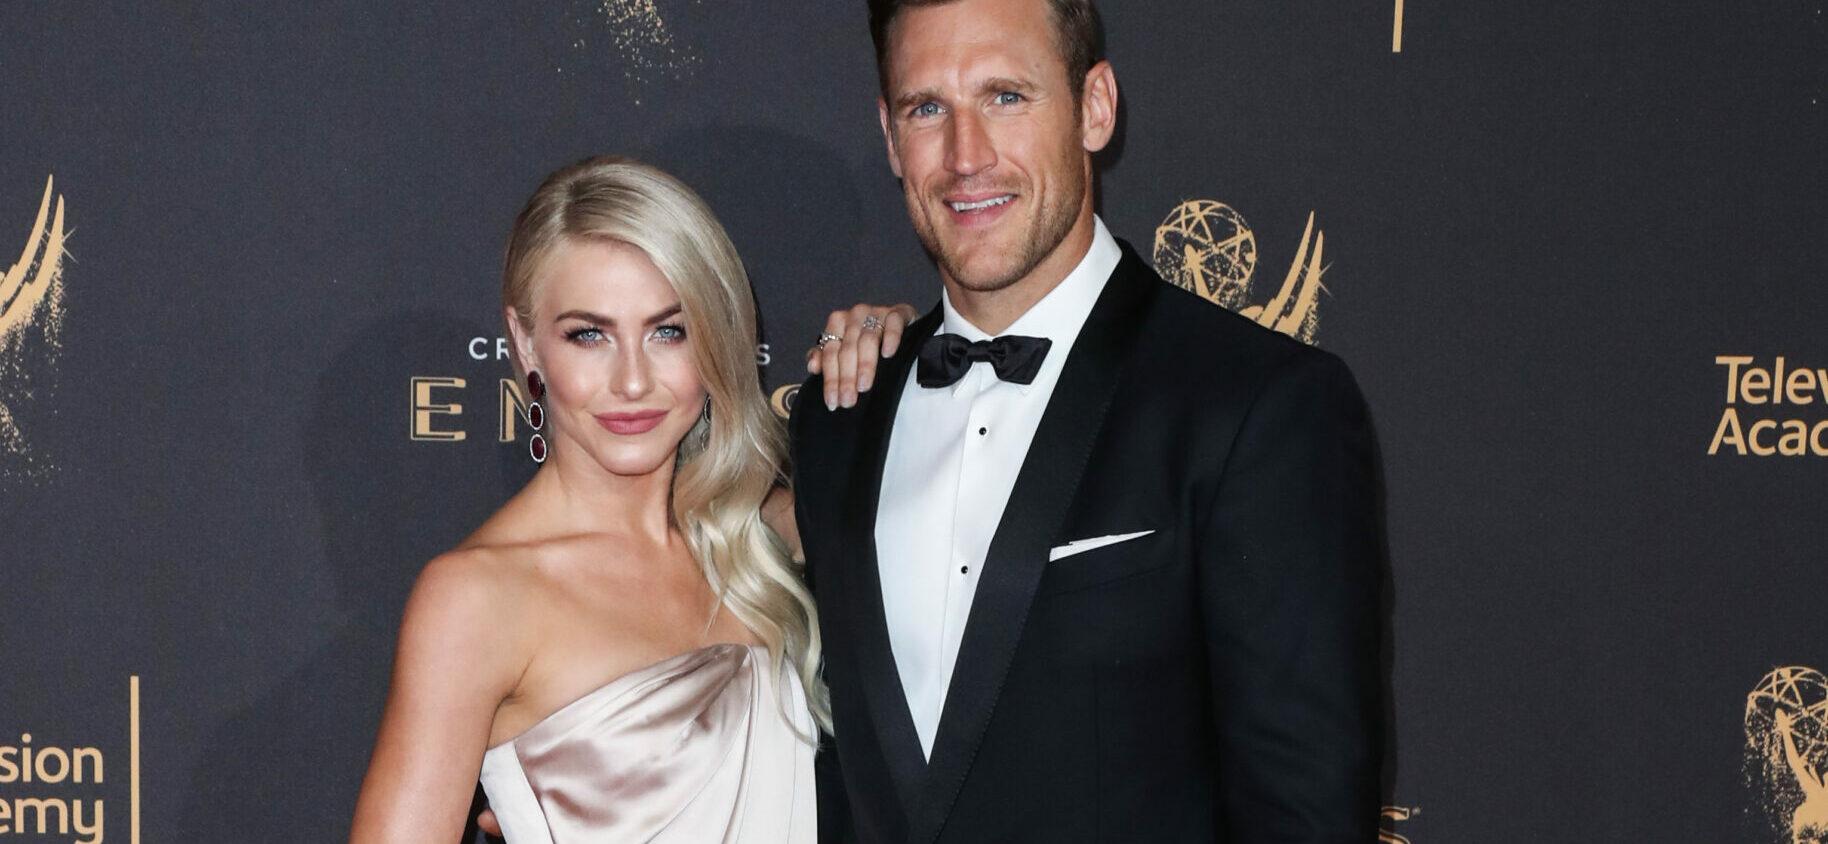 Julianne Hough Keeping Her 'China' And 'Silverware' In Divorce Settlement